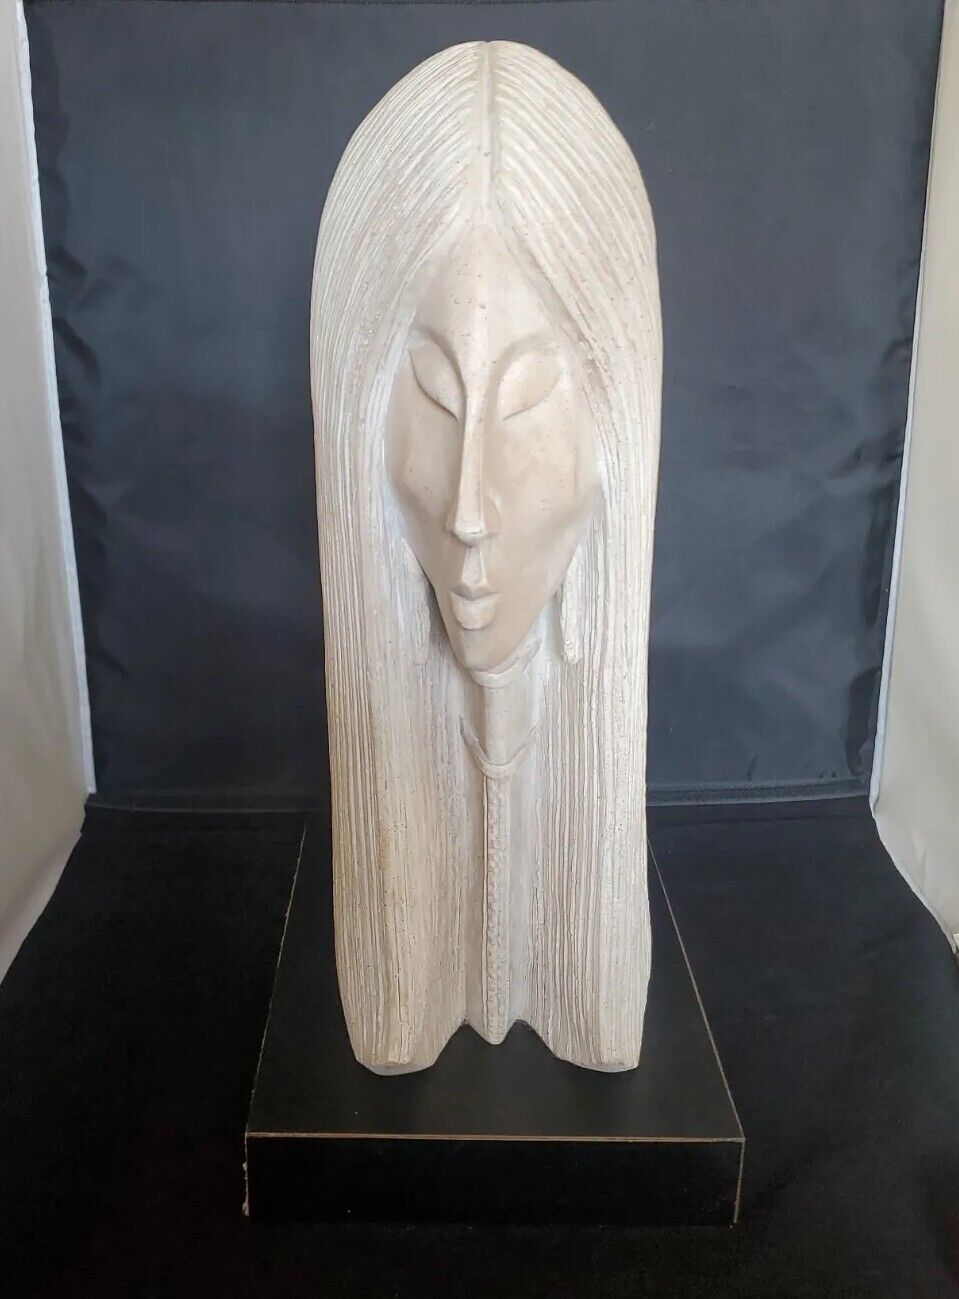 Austin Productions 20” ACOMA Woman Sculpture 1986 Signed David Fisher, RARE